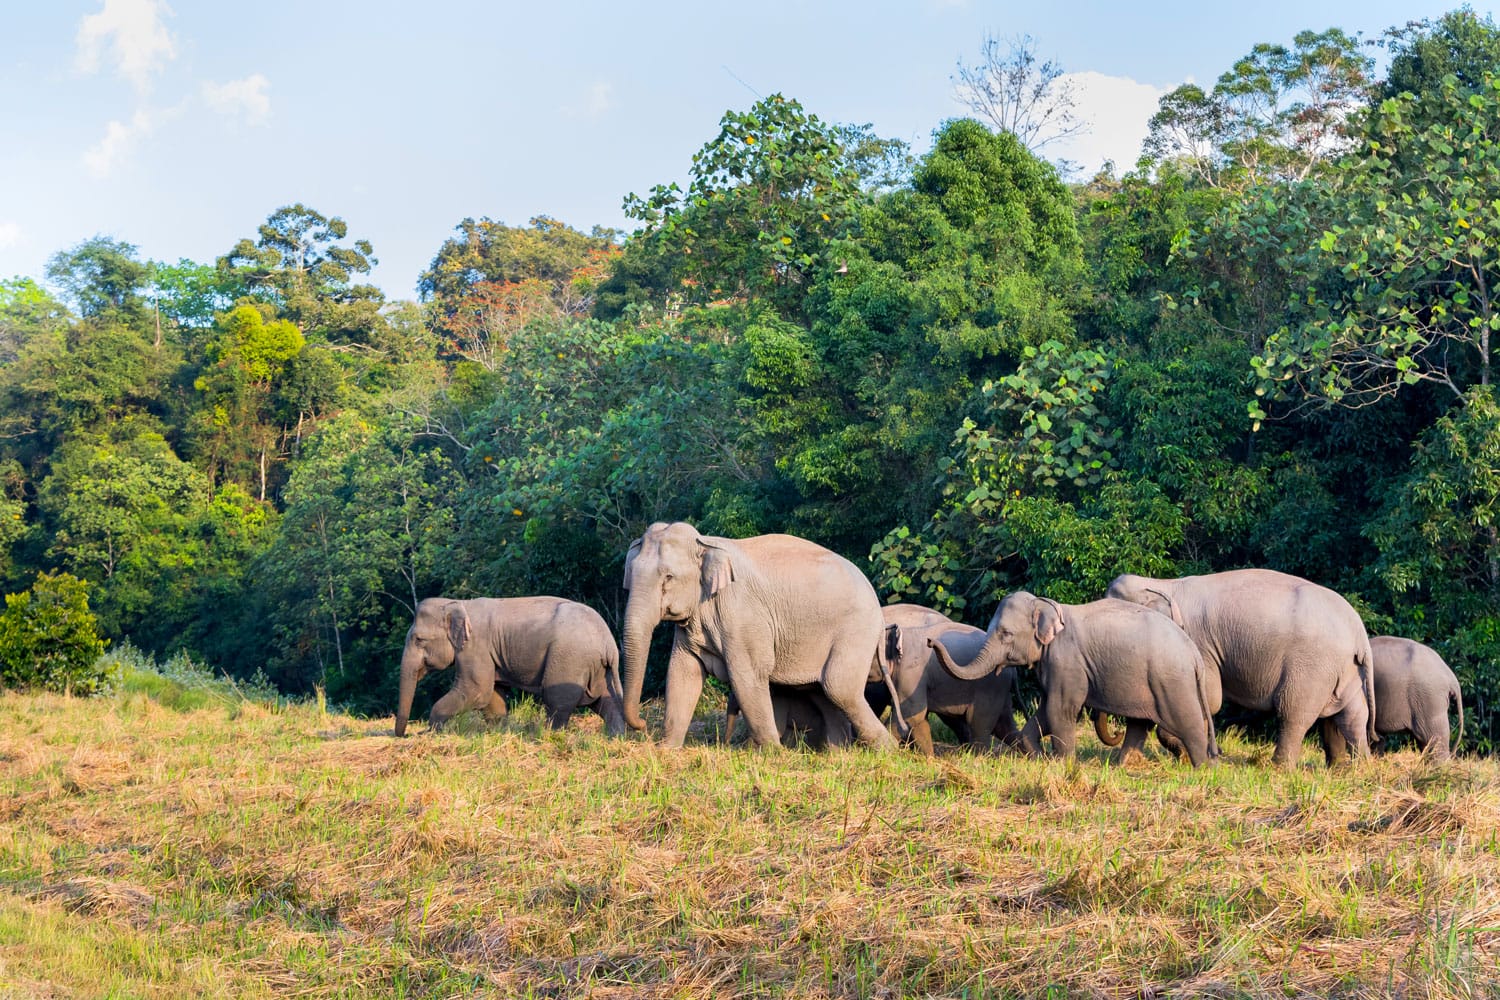 Group of Wild Elephant walking on the field in nature at Khaoyai national park,Thailand